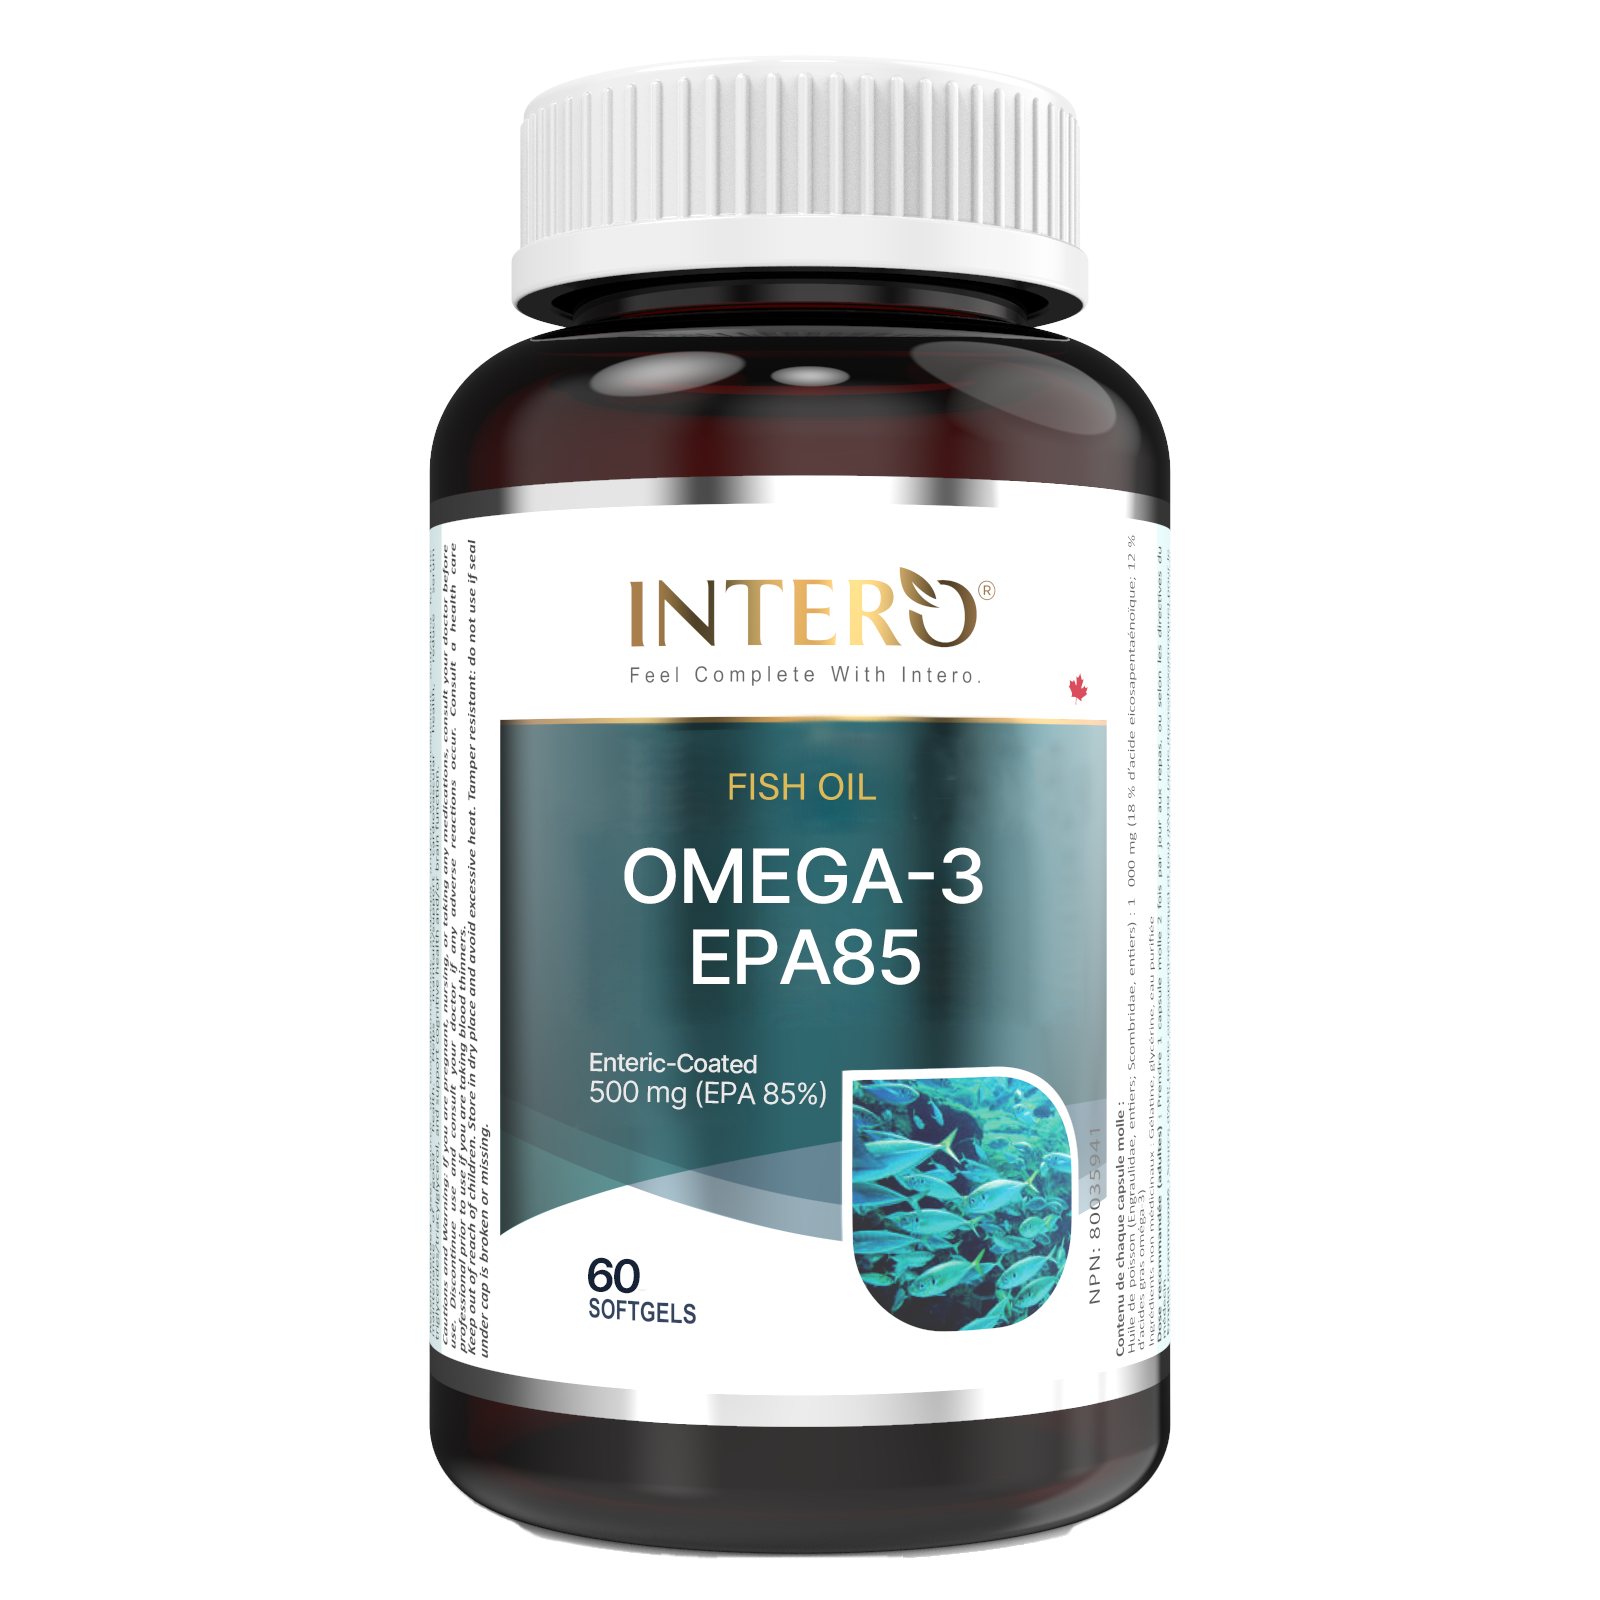 an image of a product called "Omega-3 EPA 85 Enteric-Coated"